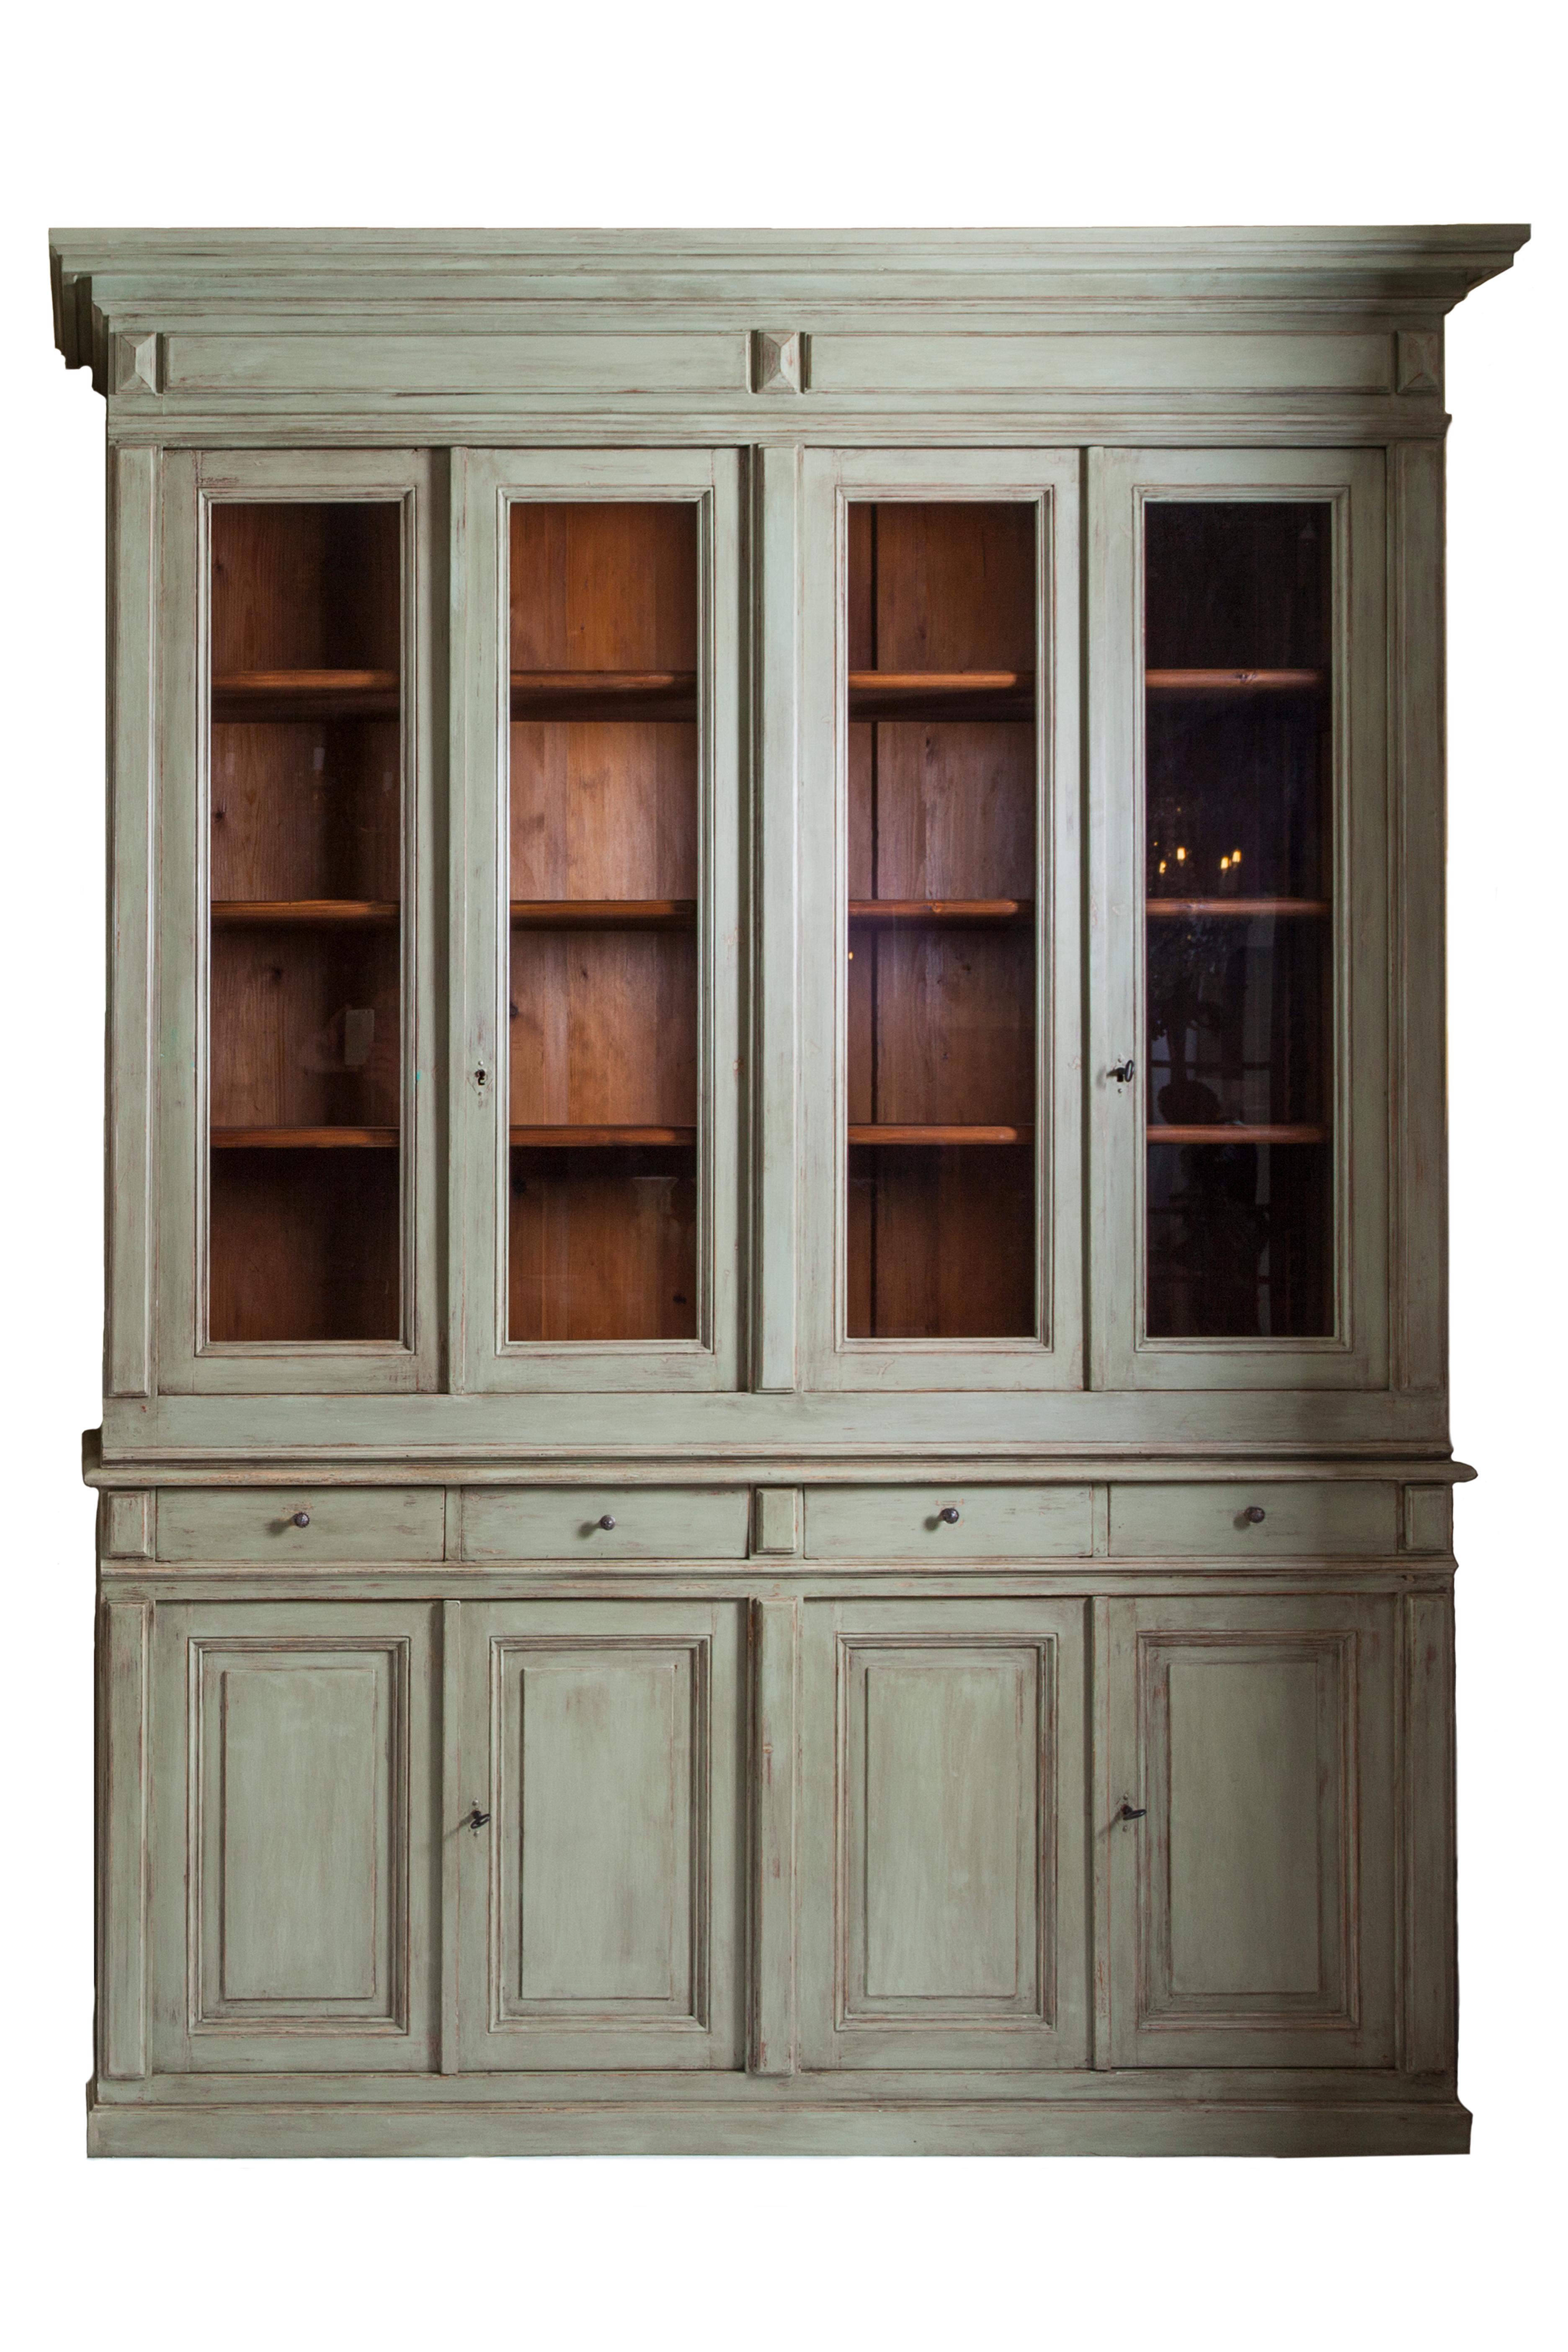 Neoclassical Revival 19th Century Neoclassical French Pinewood Pharmacy Bookcases